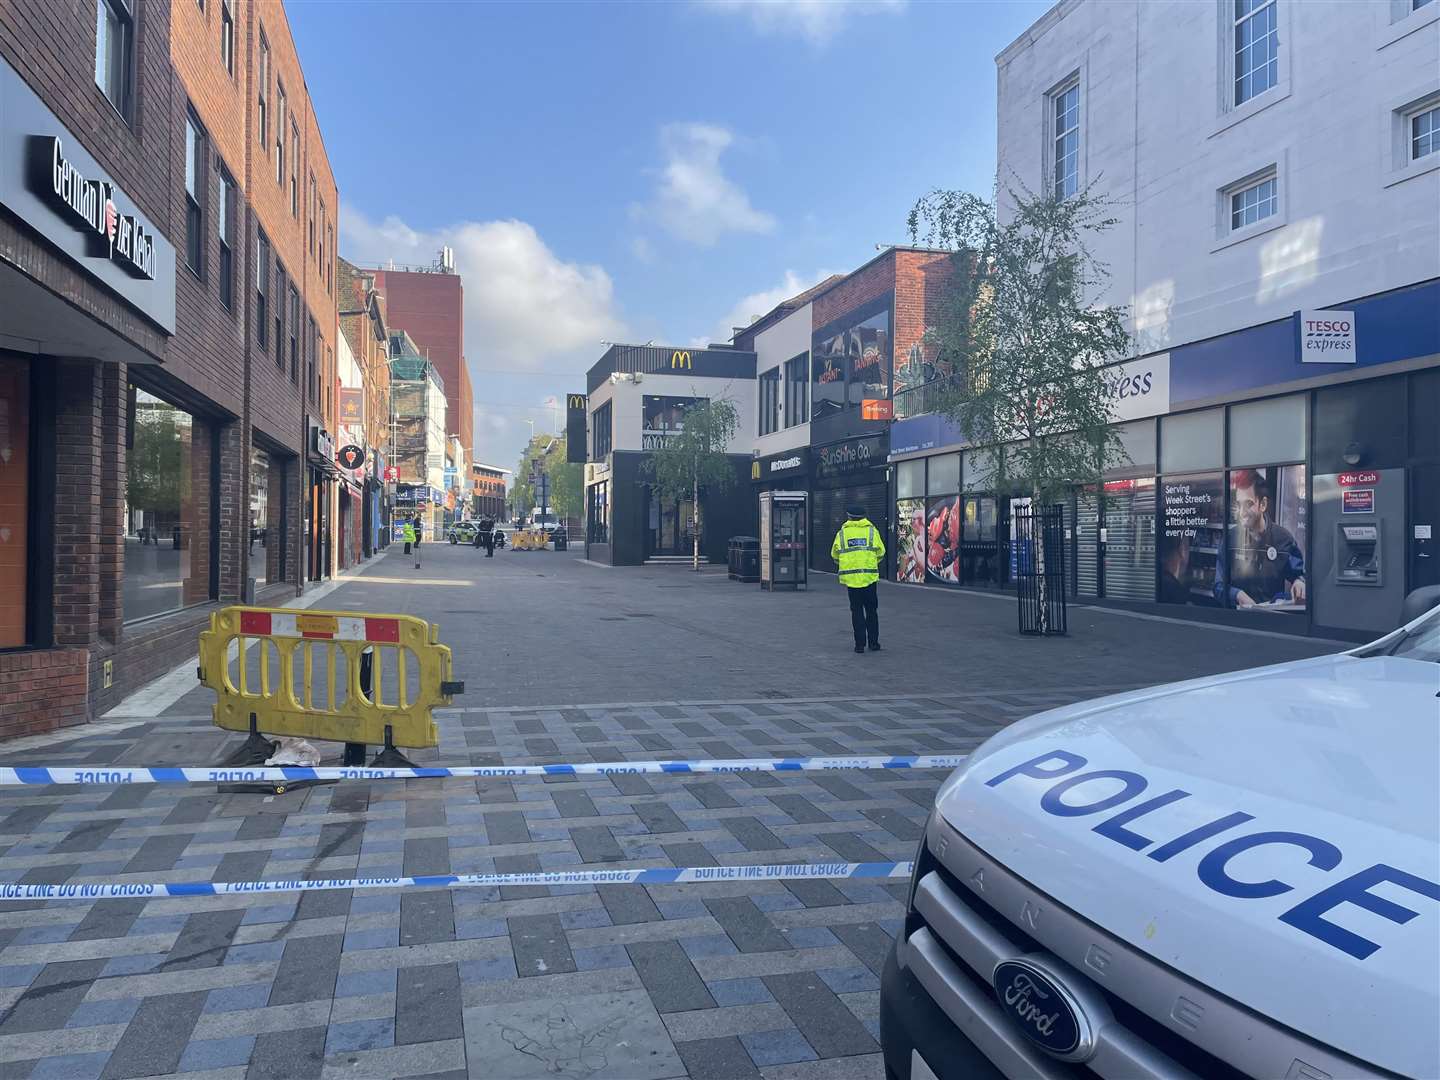 Police were at the scene of the stabbing in Week Street, Maidstone